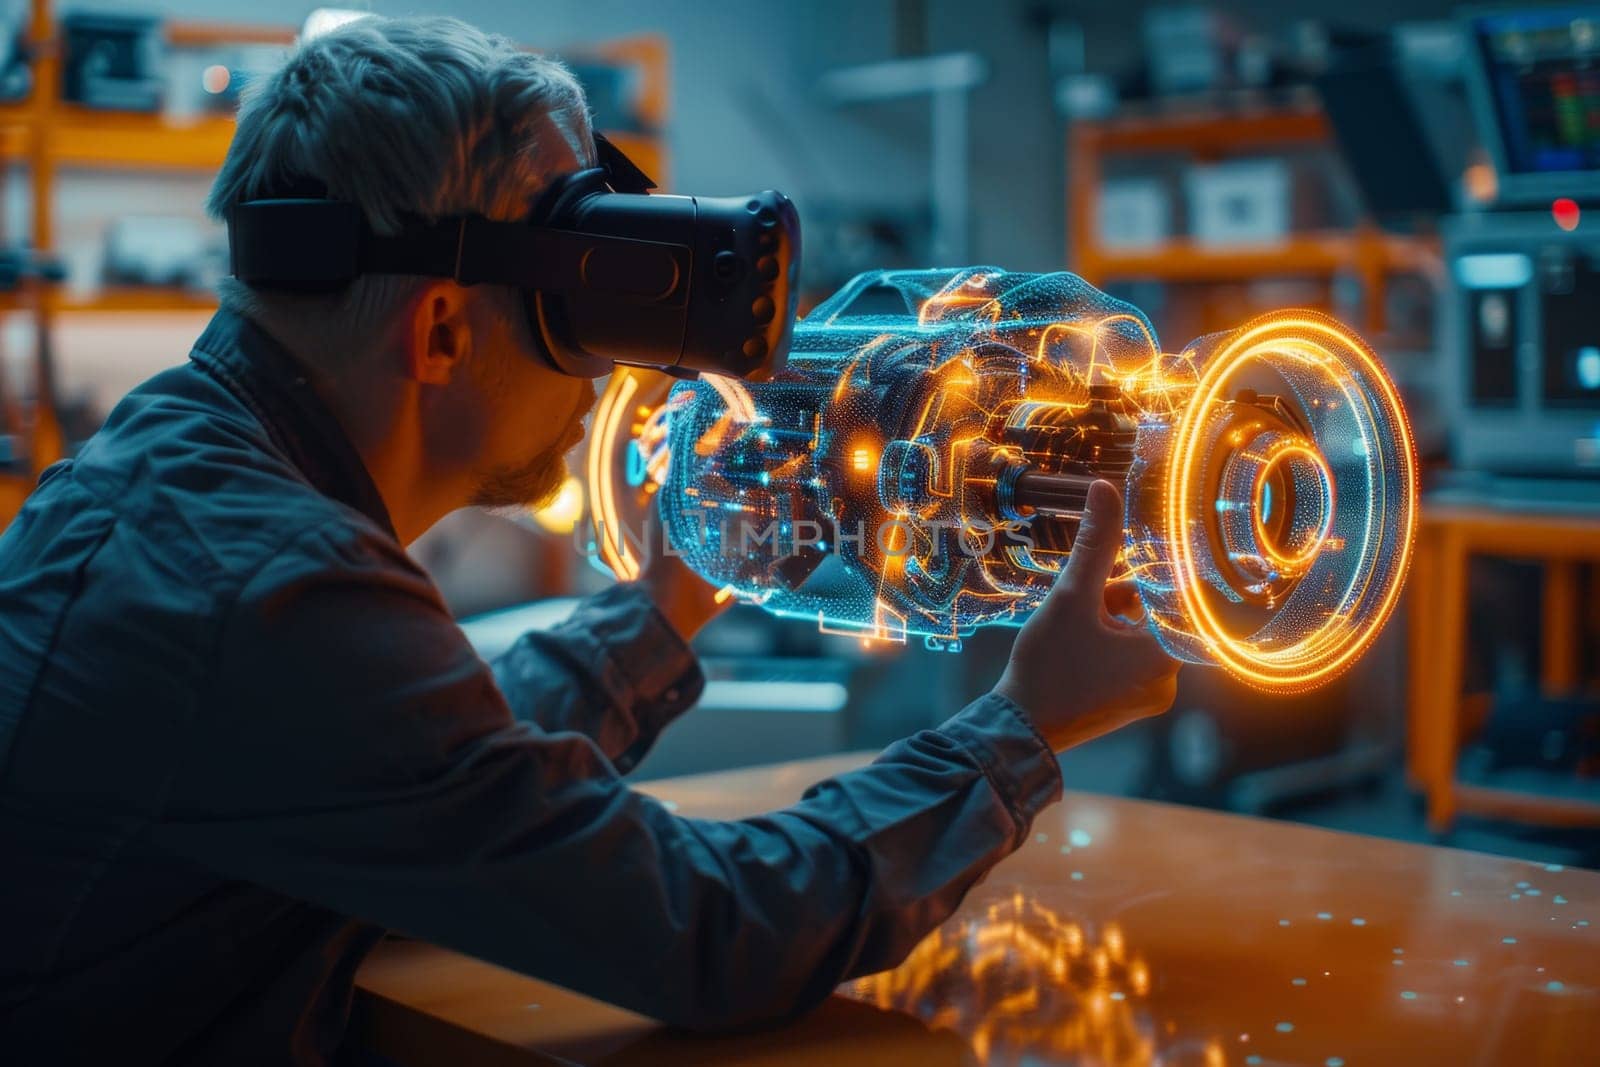 A man is looking at a car with a VR headset on. The car is a futuristic design with bright orange accents. The man is examining the car's engine, possibly making adjustments or repairs